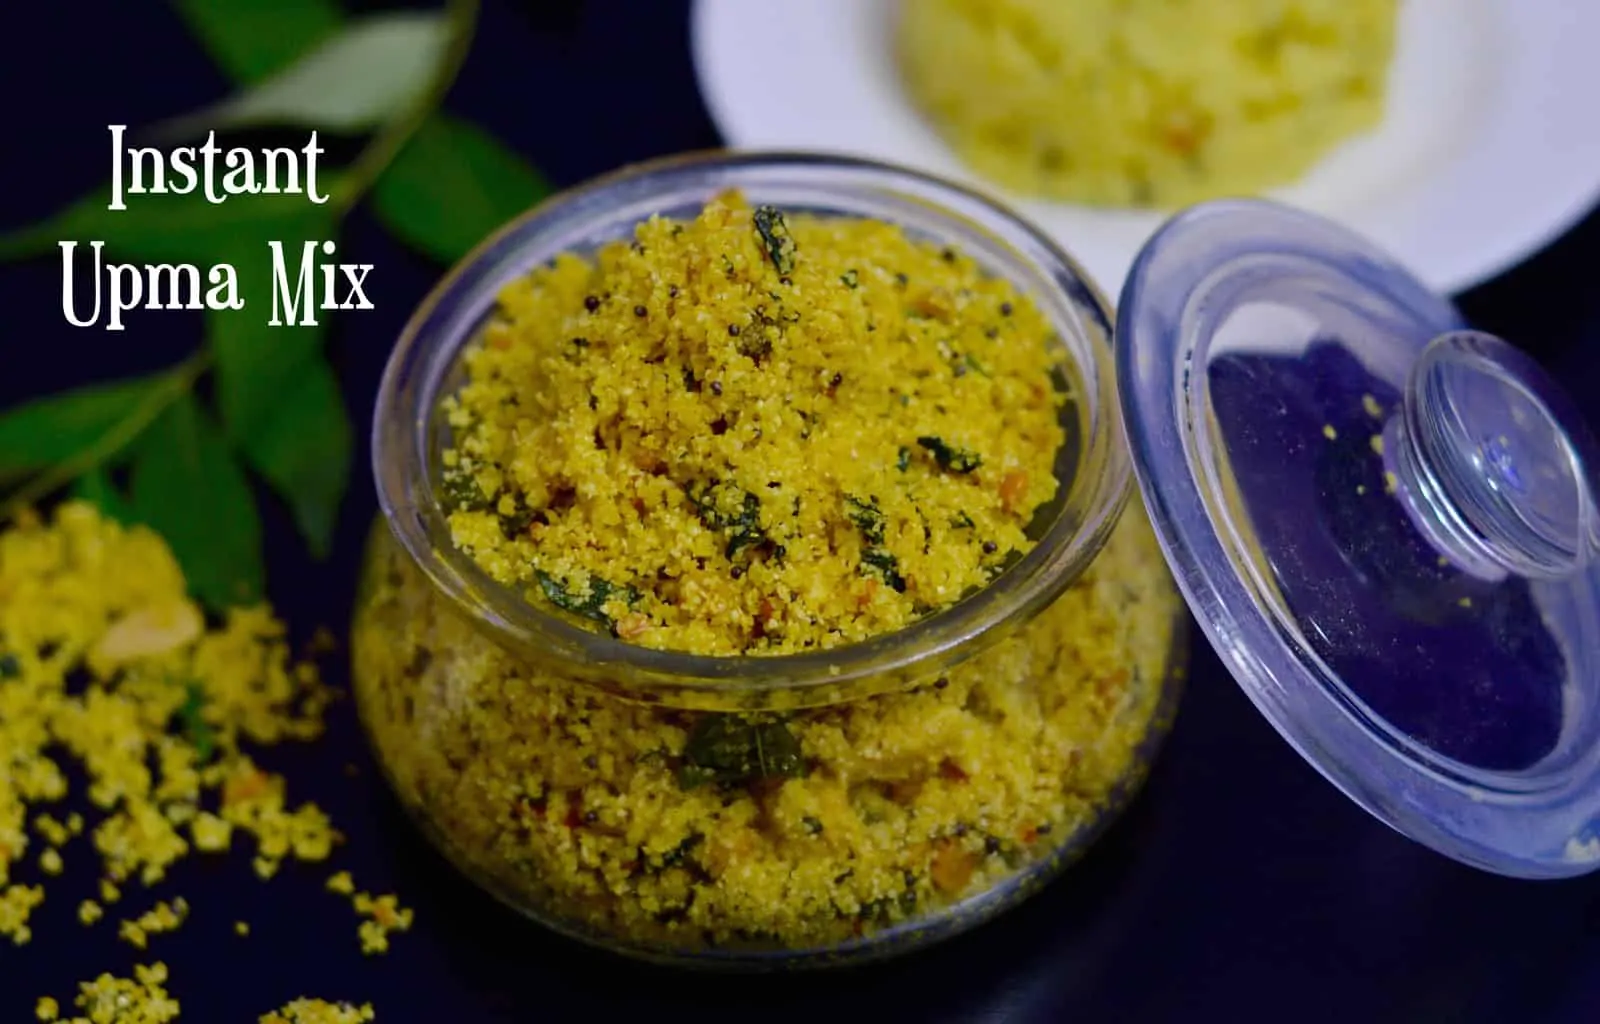 nstant Upma Mix|How to Make Ready-To-Cook Upma Mix is very helpful for people staying away from home, bachelors, college students staying in rooms